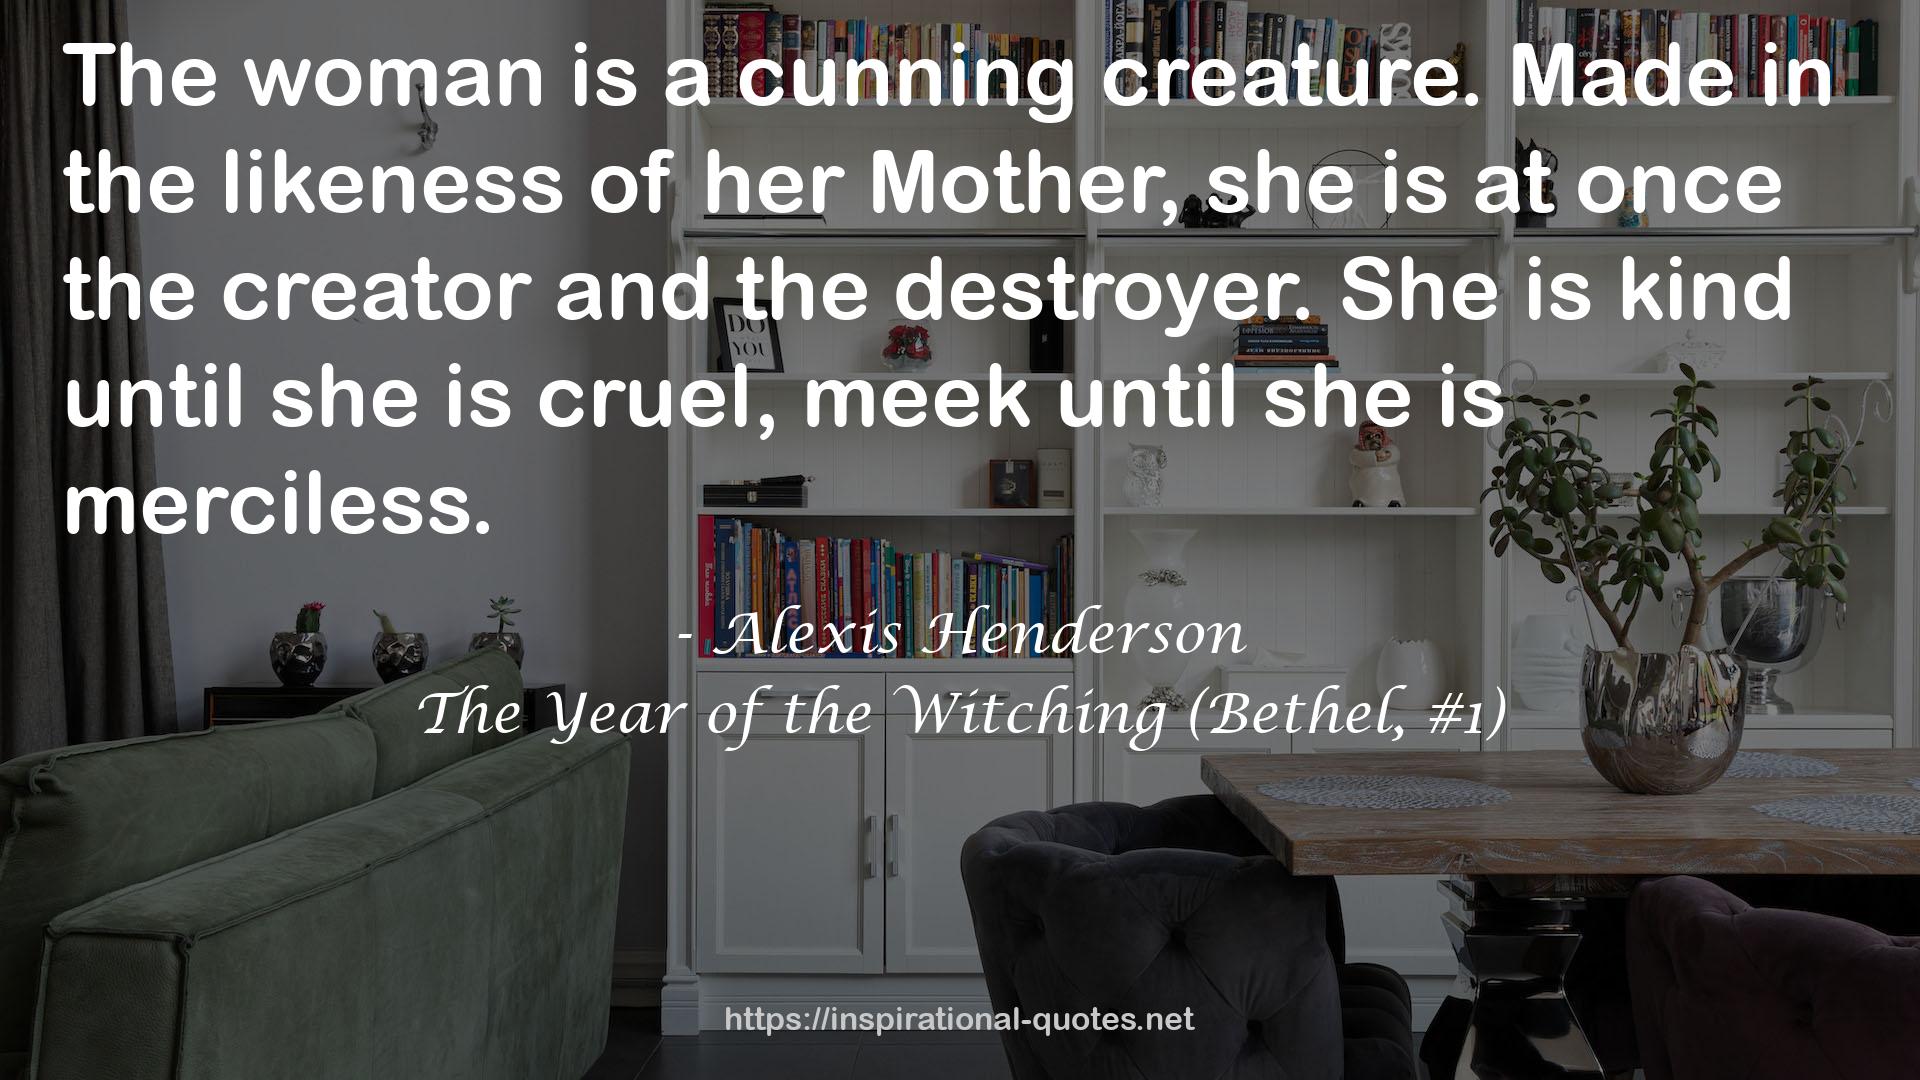 The Year of the Witching (Bethel, #1) QUOTES